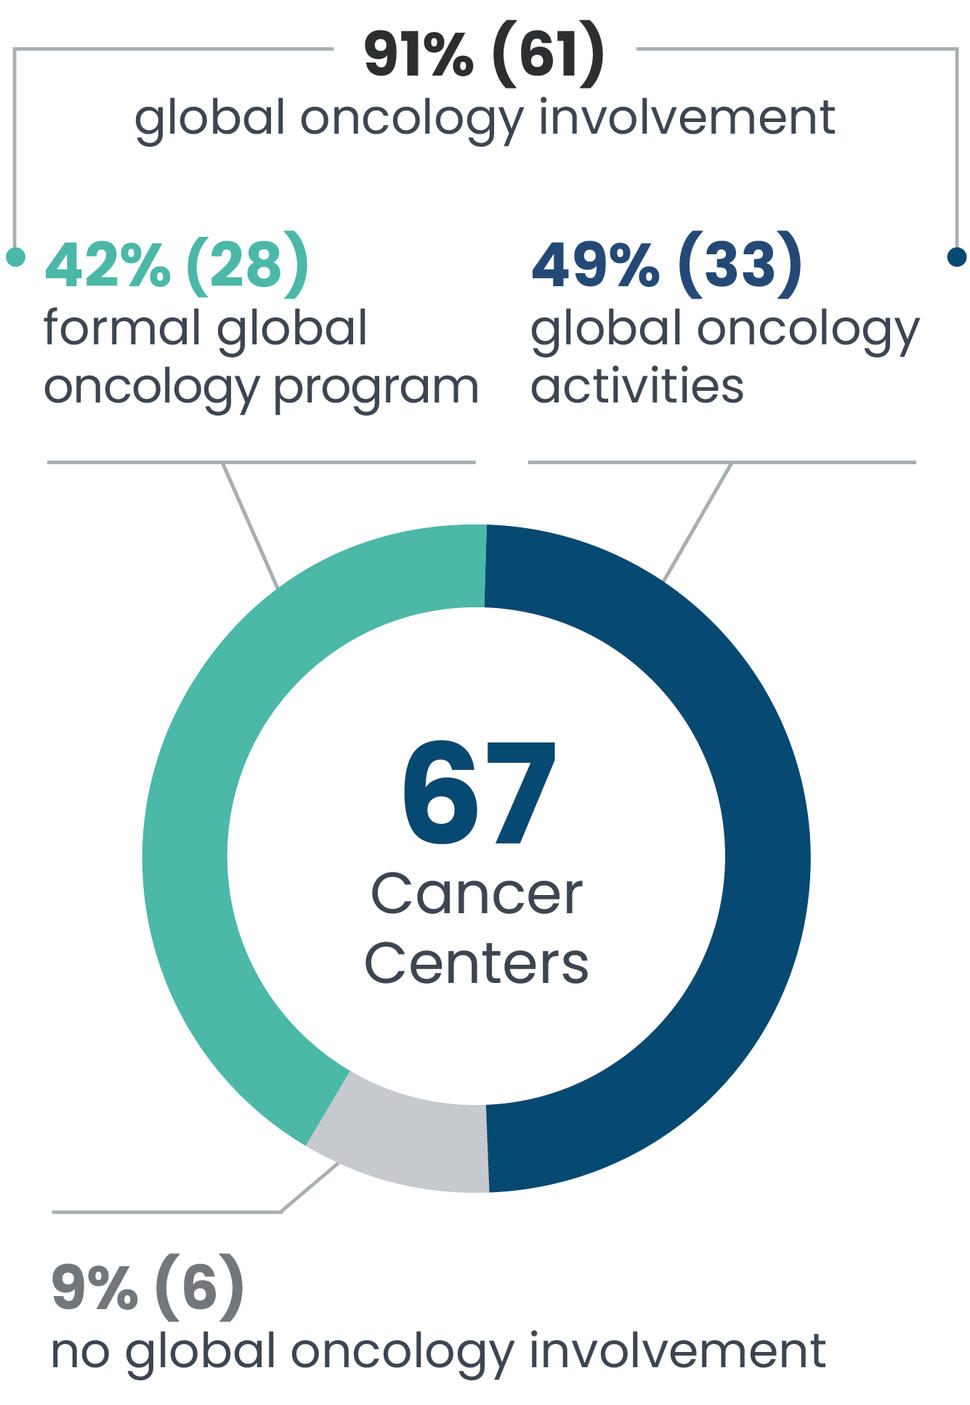 Details global oncology involvement